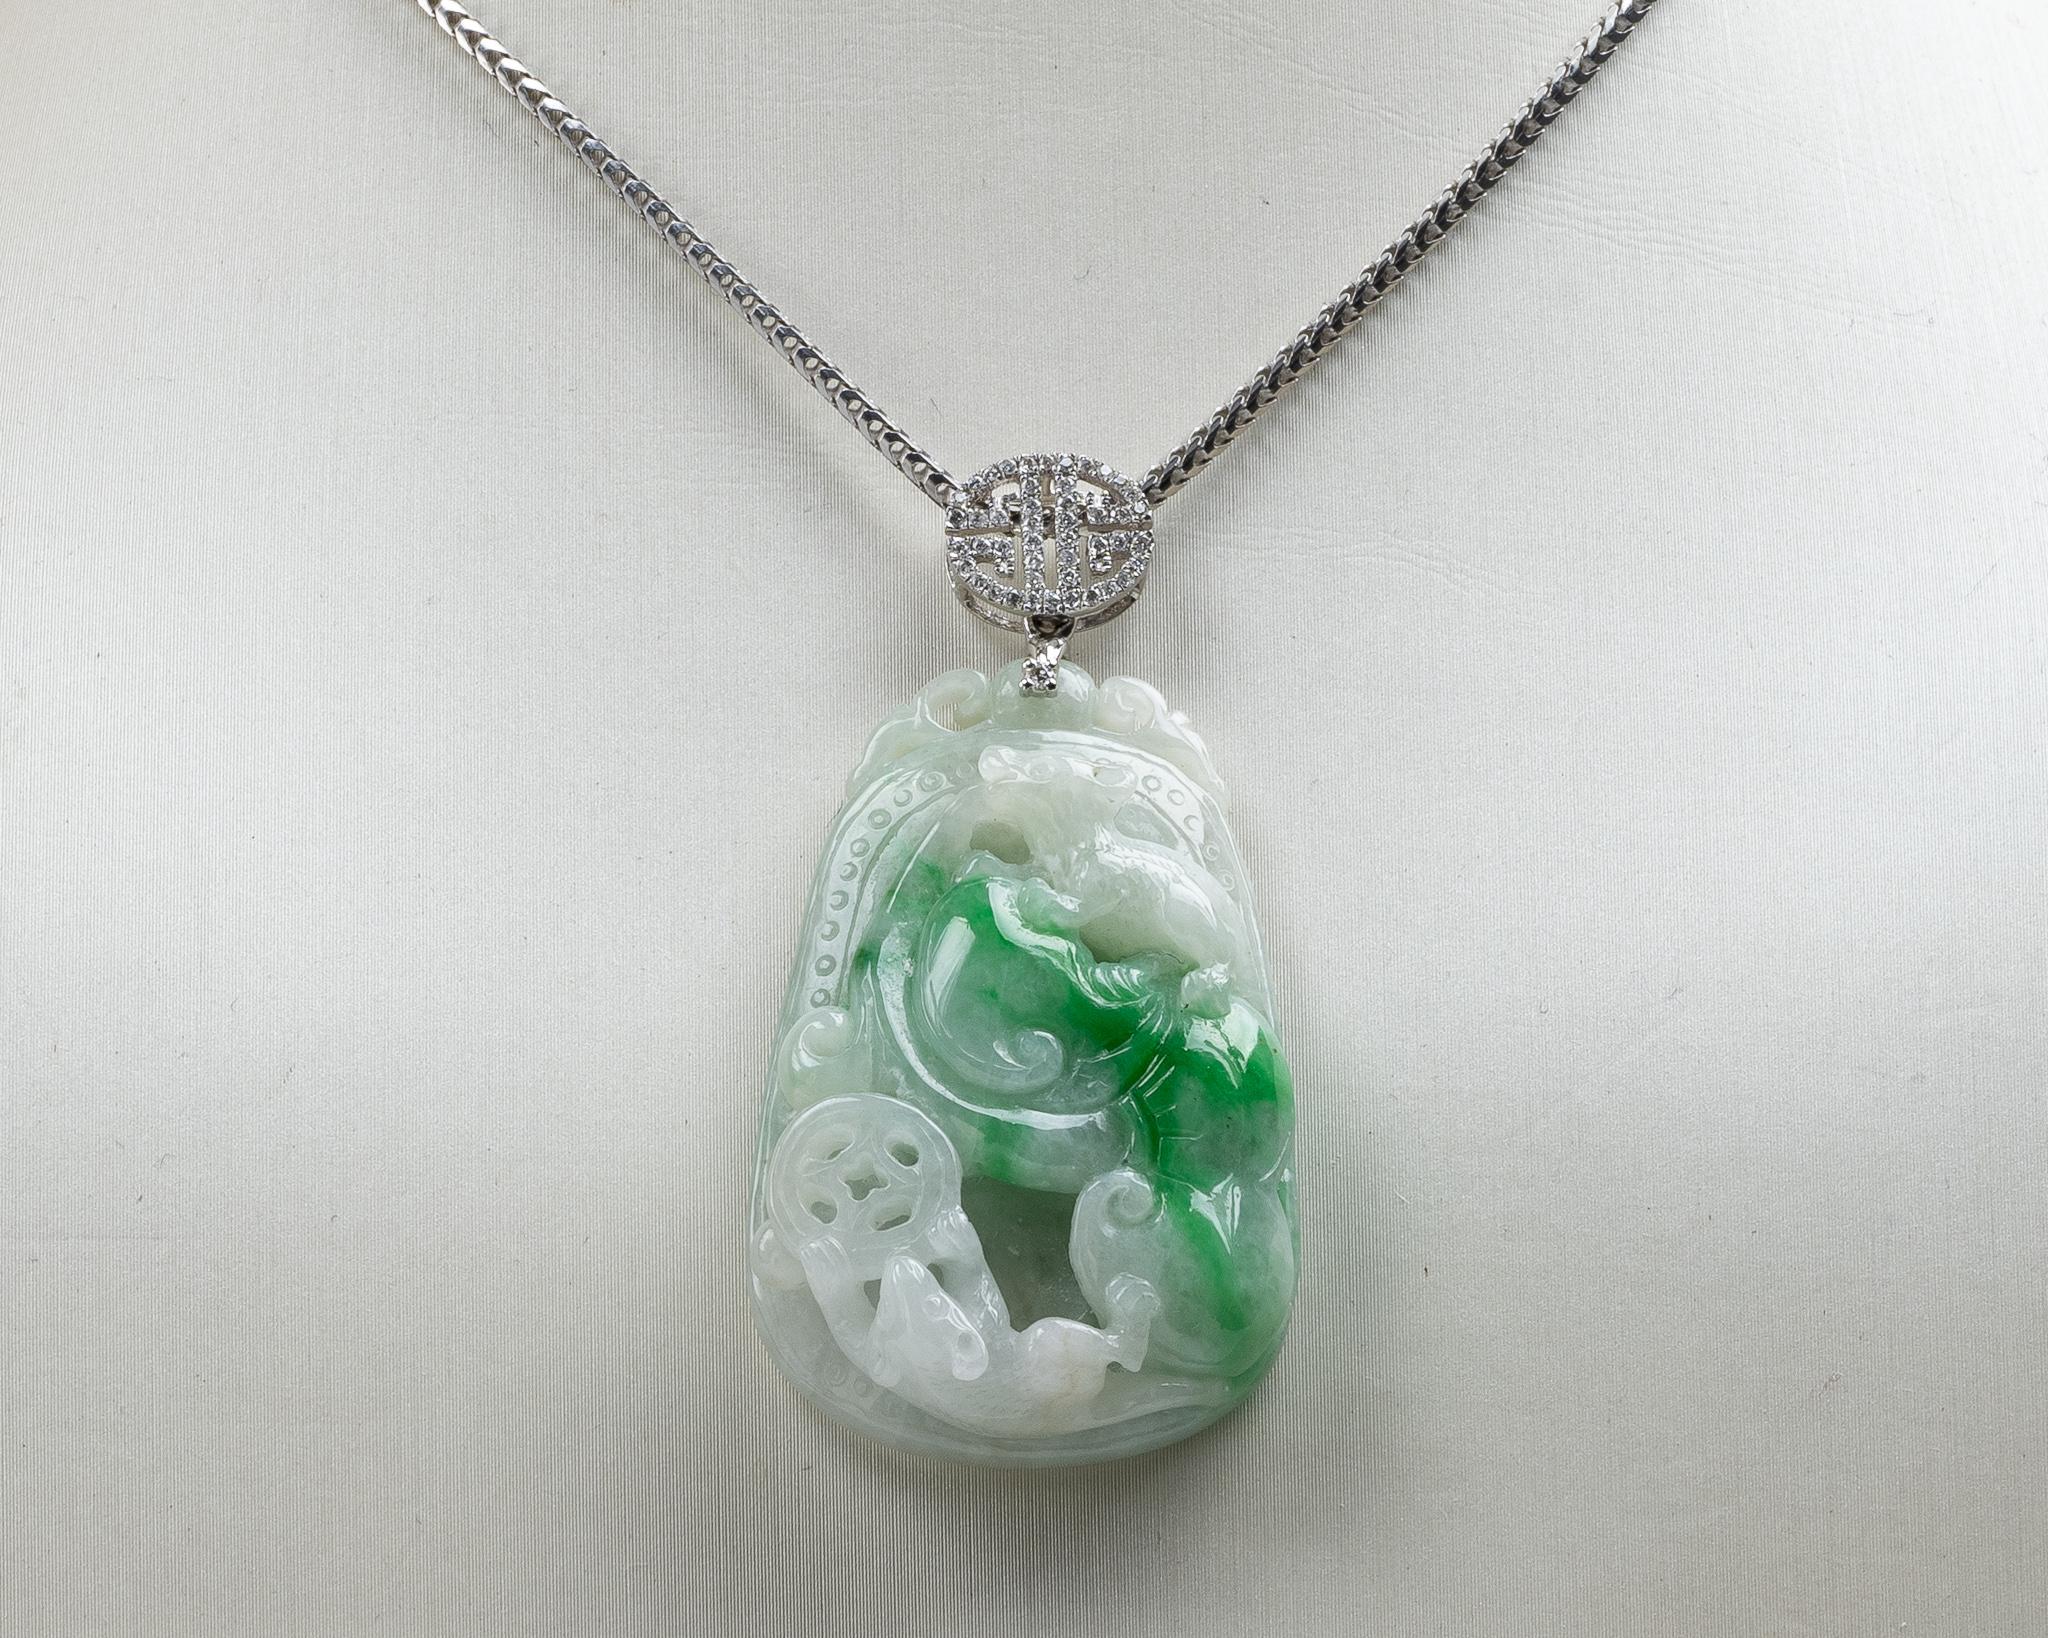 Green Jadeite Jade Ruyi and Coin Pendant, Certified Untreated For Sale ...